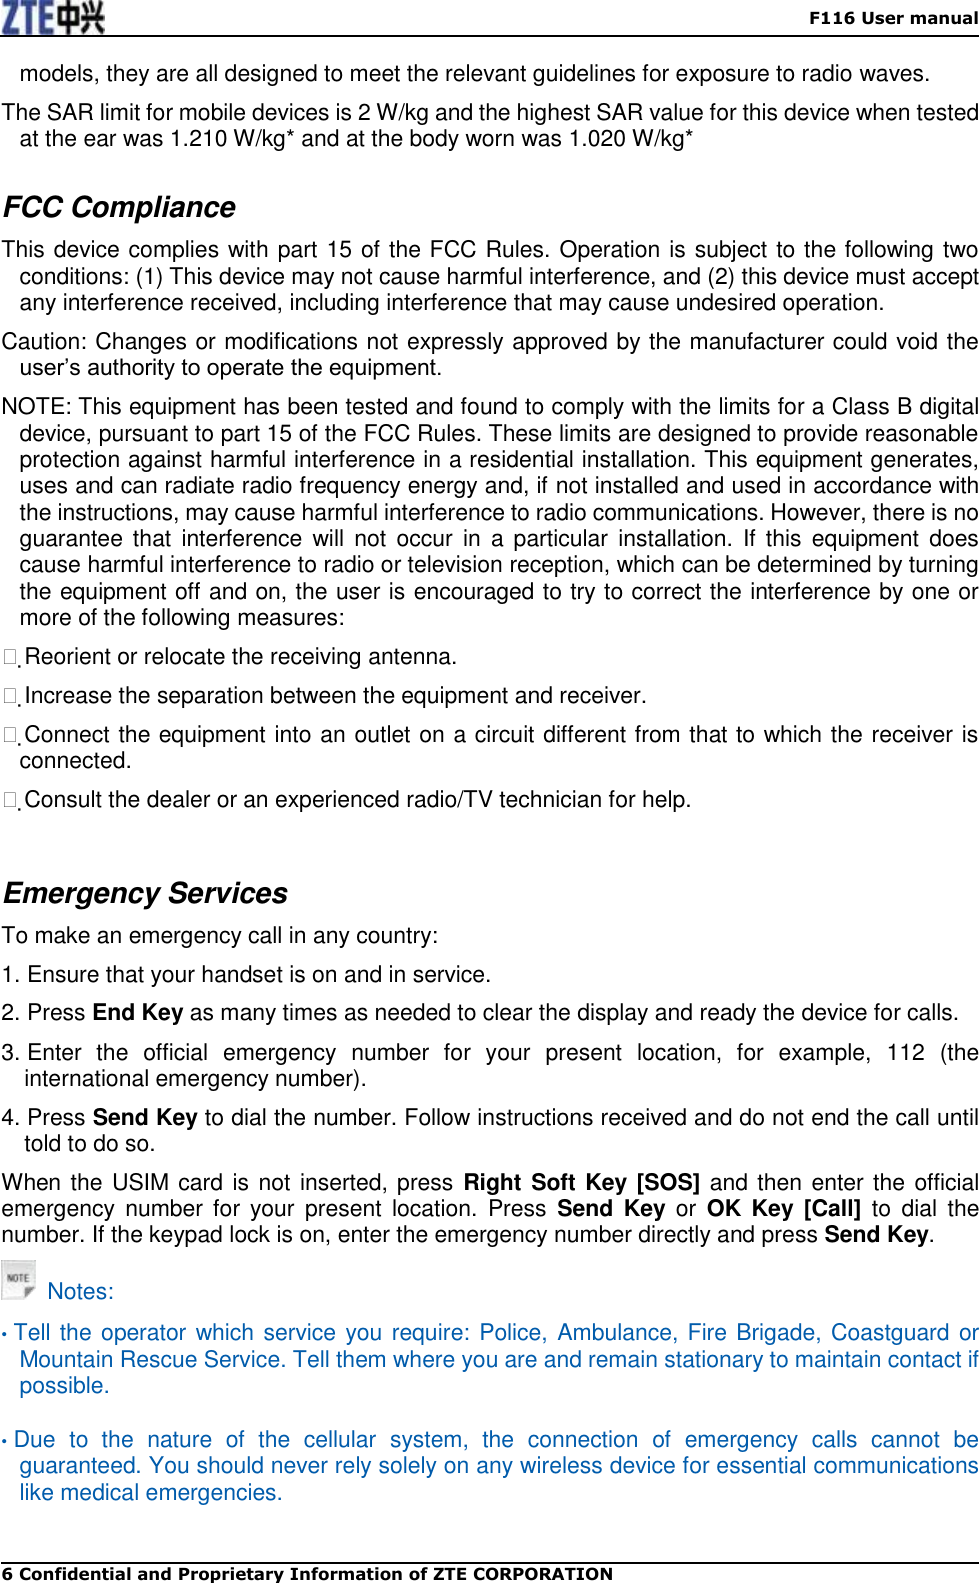    F116 User manual 6 Confidential and Proprietary Information of ZTE CORPORATION models, they are all designed to meet the relevant guidelines for exposure to radio waves. The SAR limit for mobile devices is 2 W/kg and the highest SAR value for this device when tested at the ear was 1.210 W/kg* and at the body worn was 1.020 W/kg*  FCC Compliance   This device complies with part 15 of the FCC Rules. Operation is subject to the following two conditions: (1) This device may not cause harmful interference, and (2) this device must accept any interference received, including interference that may cause undesired operation.   Caution: Changes or modifications not expressly approved by the manufacturer could void the user’s authority to operate the equipment.   NOTE: This equipment has been tested and found to comply with the limits for a Class B digital device, pursuant to part 15 of the FCC Rules. These limits are designed to provide reasonable protection against harmful interference in a residential installation. This equipment generates, uses and can radiate radio frequency energy and, if not installed and used in accordance with the instructions, may cause harmful interference to radio communications. However, there is no guarantee that  interference  will  not  occur  in  a  particular  installation.  If  this  equipment  does cause harmful interference to radio or television reception, which can be determined by turning the equipment off and on, the user is encouraged to try to correct the interference by one or more of the following measures:   Reorient or relocate the receiving antenna.   Increase the separation between the equipment and receiver.   Connect the equipment into an outlet on a circuit different from that to which the receiver is connected.   Consult the dealer or an experienced radio/TV technician for help.    Emergency Services To make an emergency call in any country: 1. Ensure that your handset is on and in service. 2. Press End Key as many times as needed to clear the display and ready the device for calls. 3. Enter  the  official  emergency  number  for  your  present  location,  for  example,  112  (the international emergency number). 4. Press Send Key to dial the number. Follow instructions received and do not end the call until told to do so. When the USIM card is not inserted, press  Right Soft Key [SOS] and then enter the official emergency  number  for  your  present  location.  Press  Send  Key  or  OK  Key  [Call]  to  dial  the number. If the keypad lock is on, enter the emergency number directly and press Send Key.   Notes:  • Tell the operator which service you require: Police, Ambulance, Fire Brigade, Coastguard or Mountain Rescue Service. Tell them where you are and remain stationary to maintain contact if possible.  • Due  to  the  nature  of  the  cellular  system,  the  connection  of  emergency  calls  cannot  be guaranteed. You should never rely solely on any wireless device for essential communications like medical emergencies.   